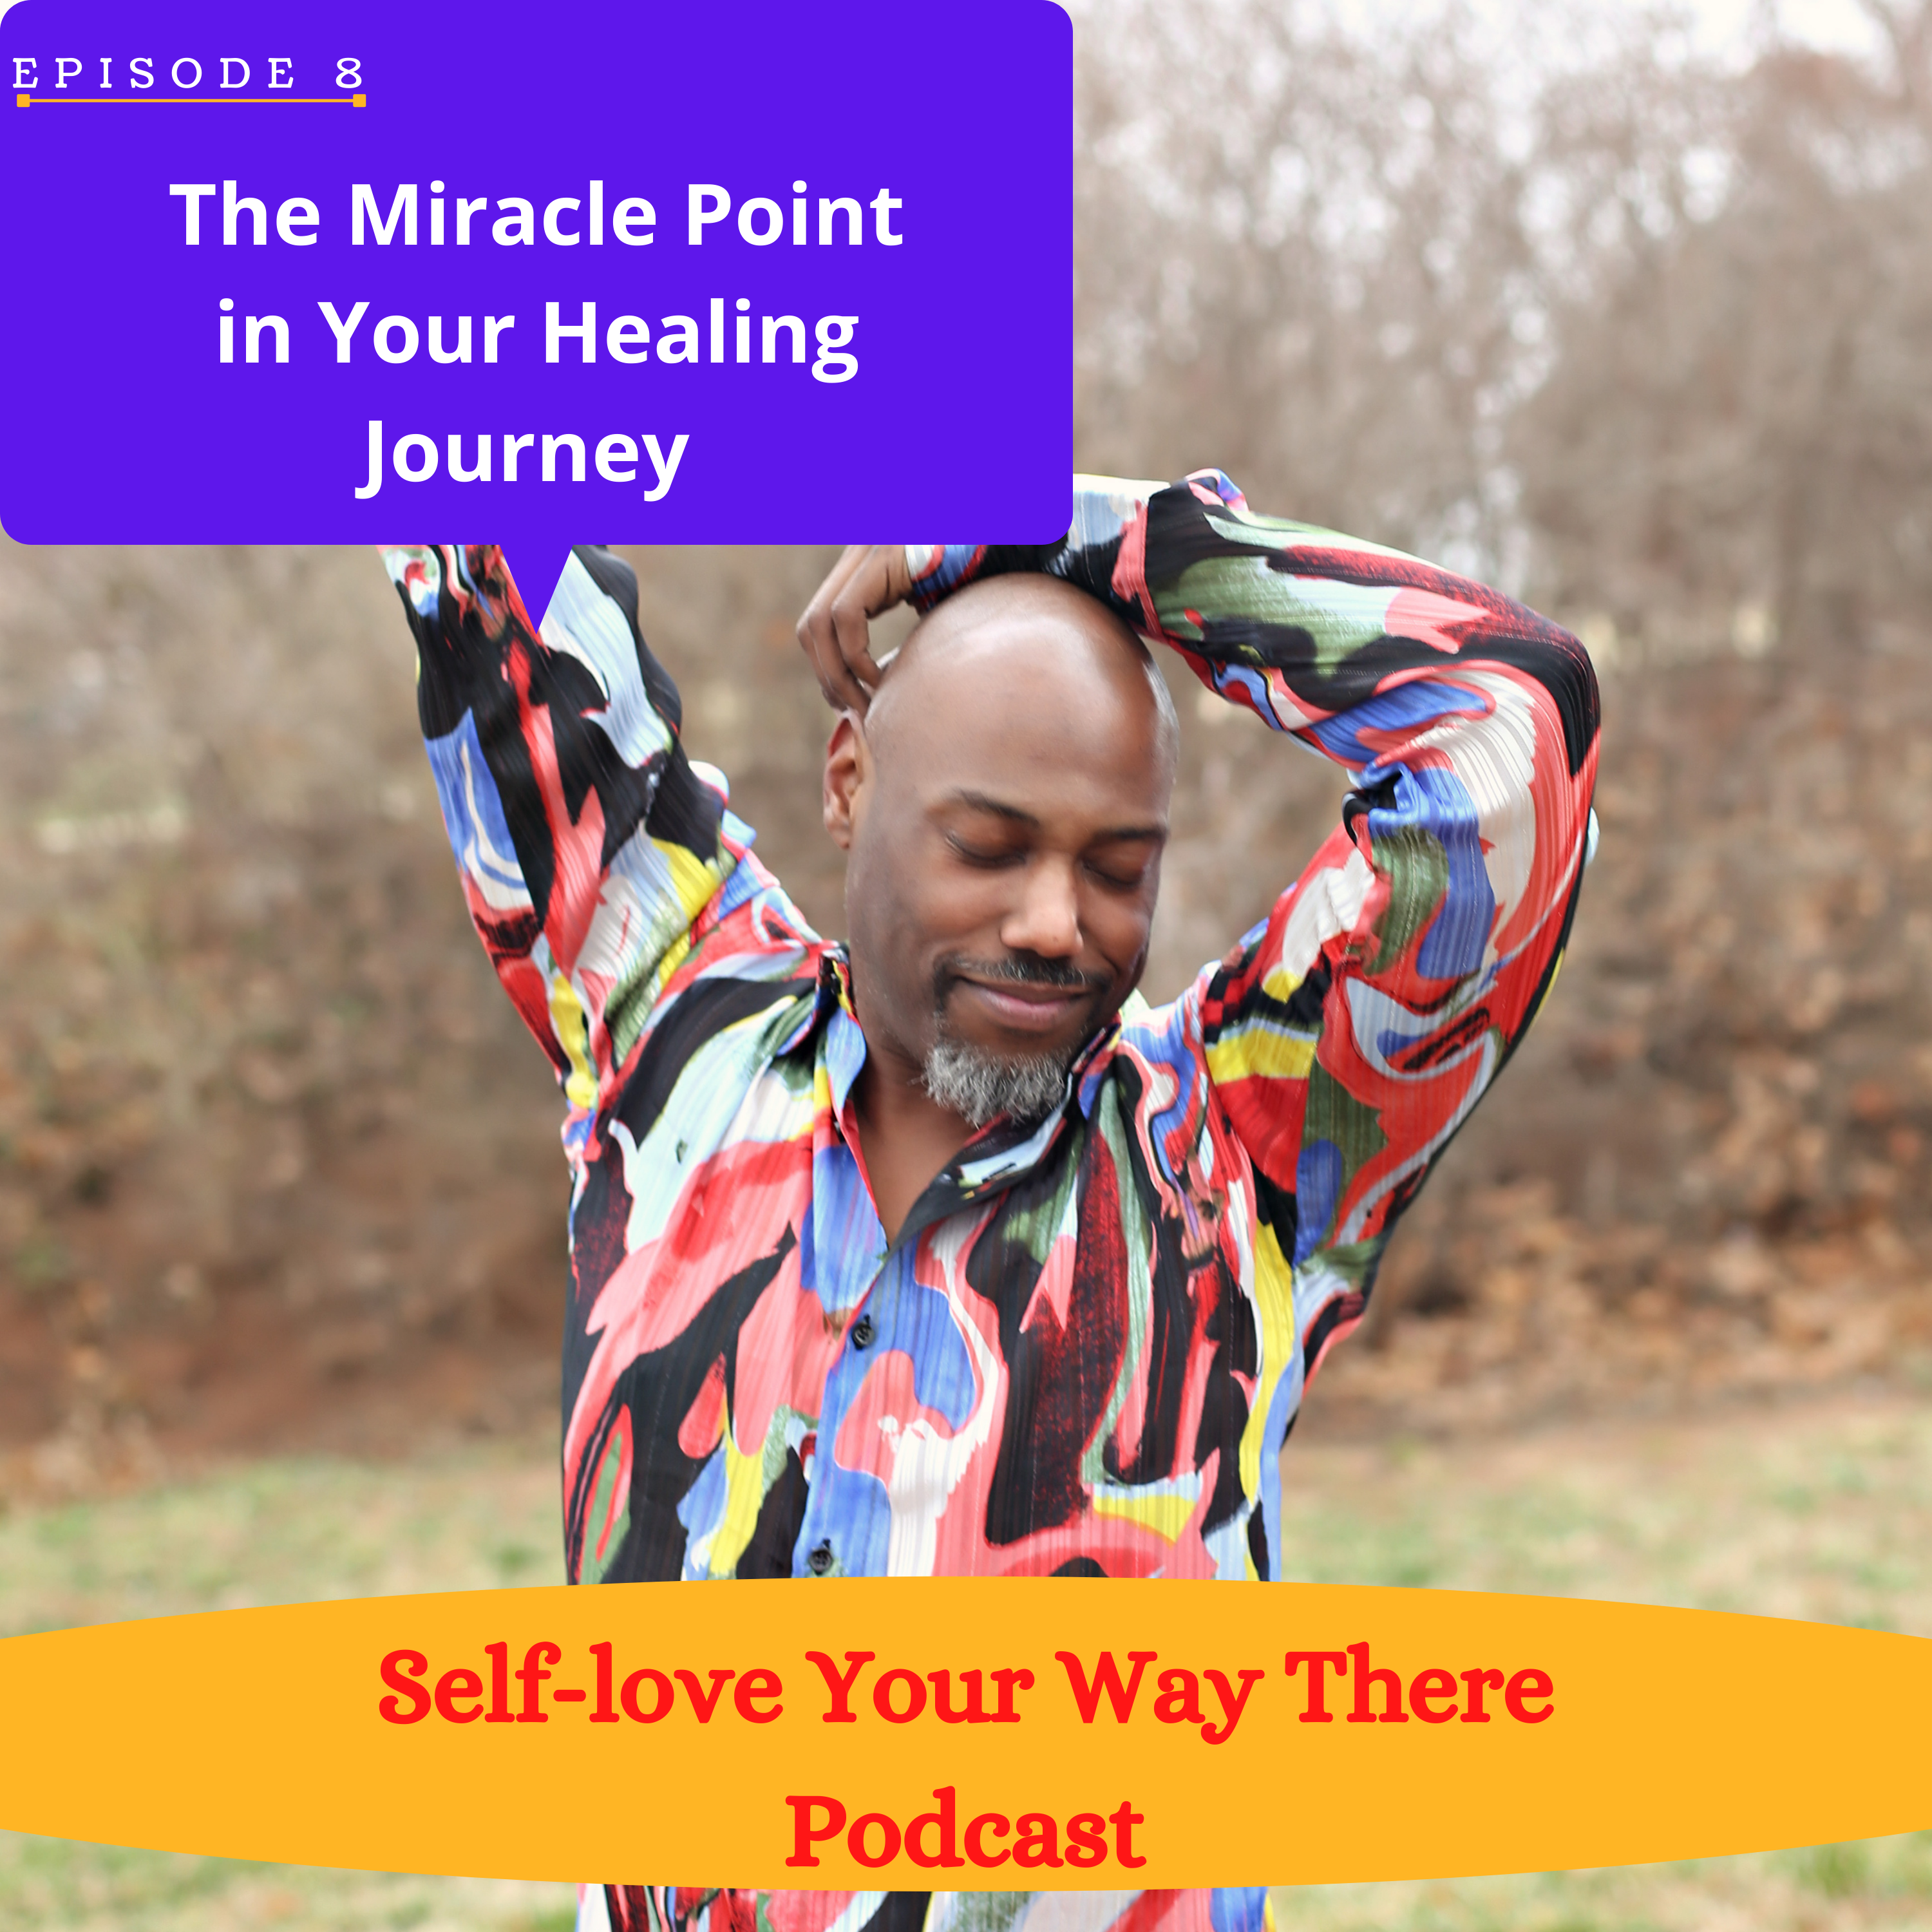 The Miracle Point in Your Healing Journey